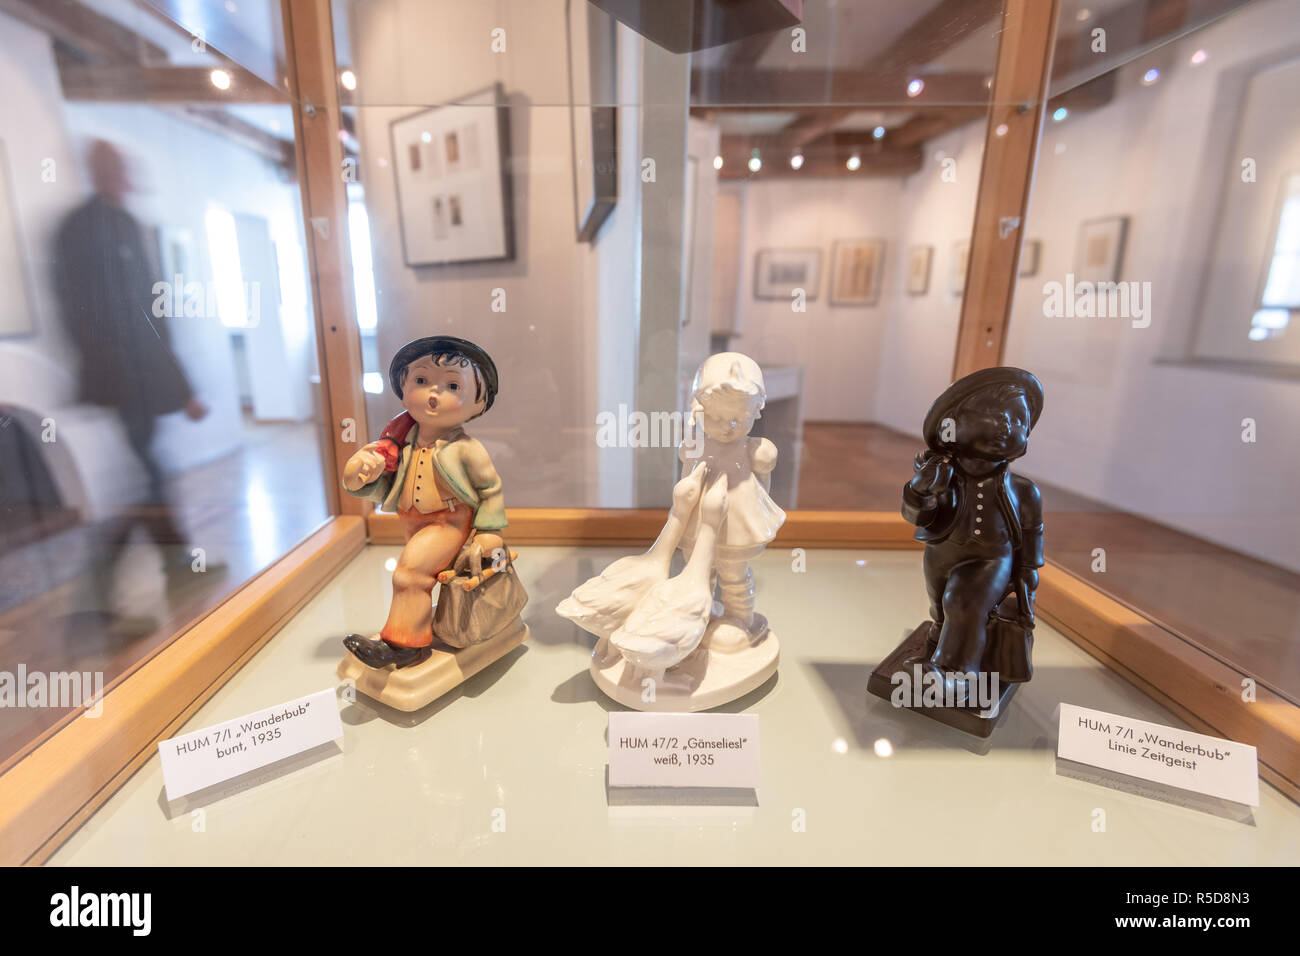 Massing, Germany. 29th Nov, 2018. The Hummel porcelain figures "Wanderbub",  "Gänseliesl" and "Wanderbub Linie Zeitgeist" are displayed in a showcase in  the Berta Hummel Museum. The museum is to be saved -